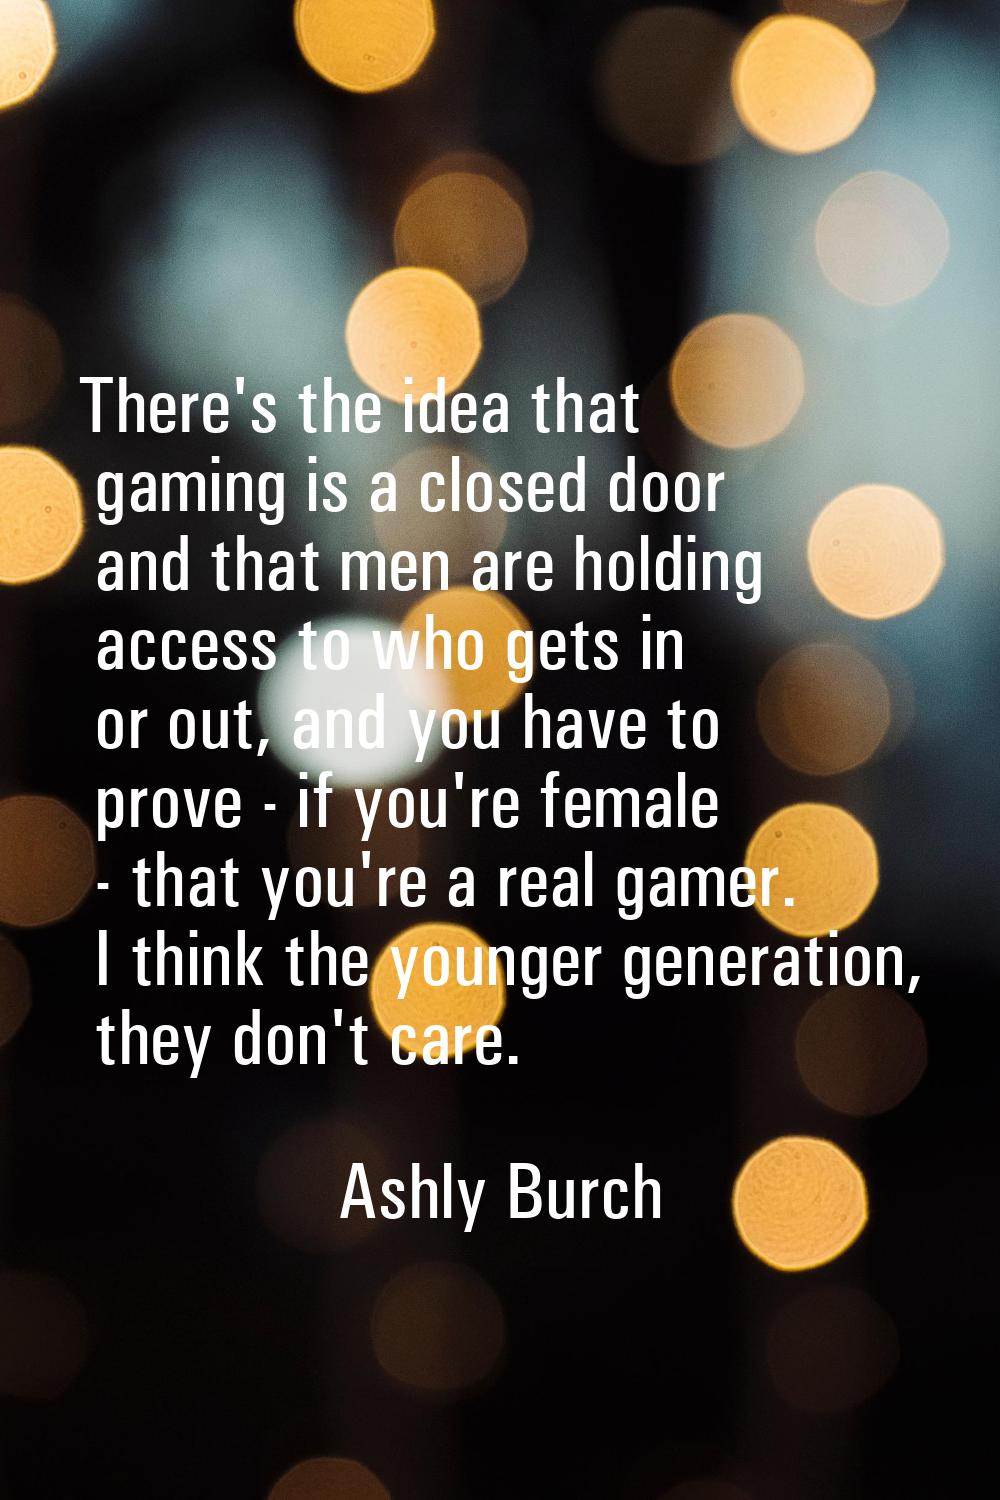 There's the idea that gaming is a closed door and that men are holding access to who gets in or out